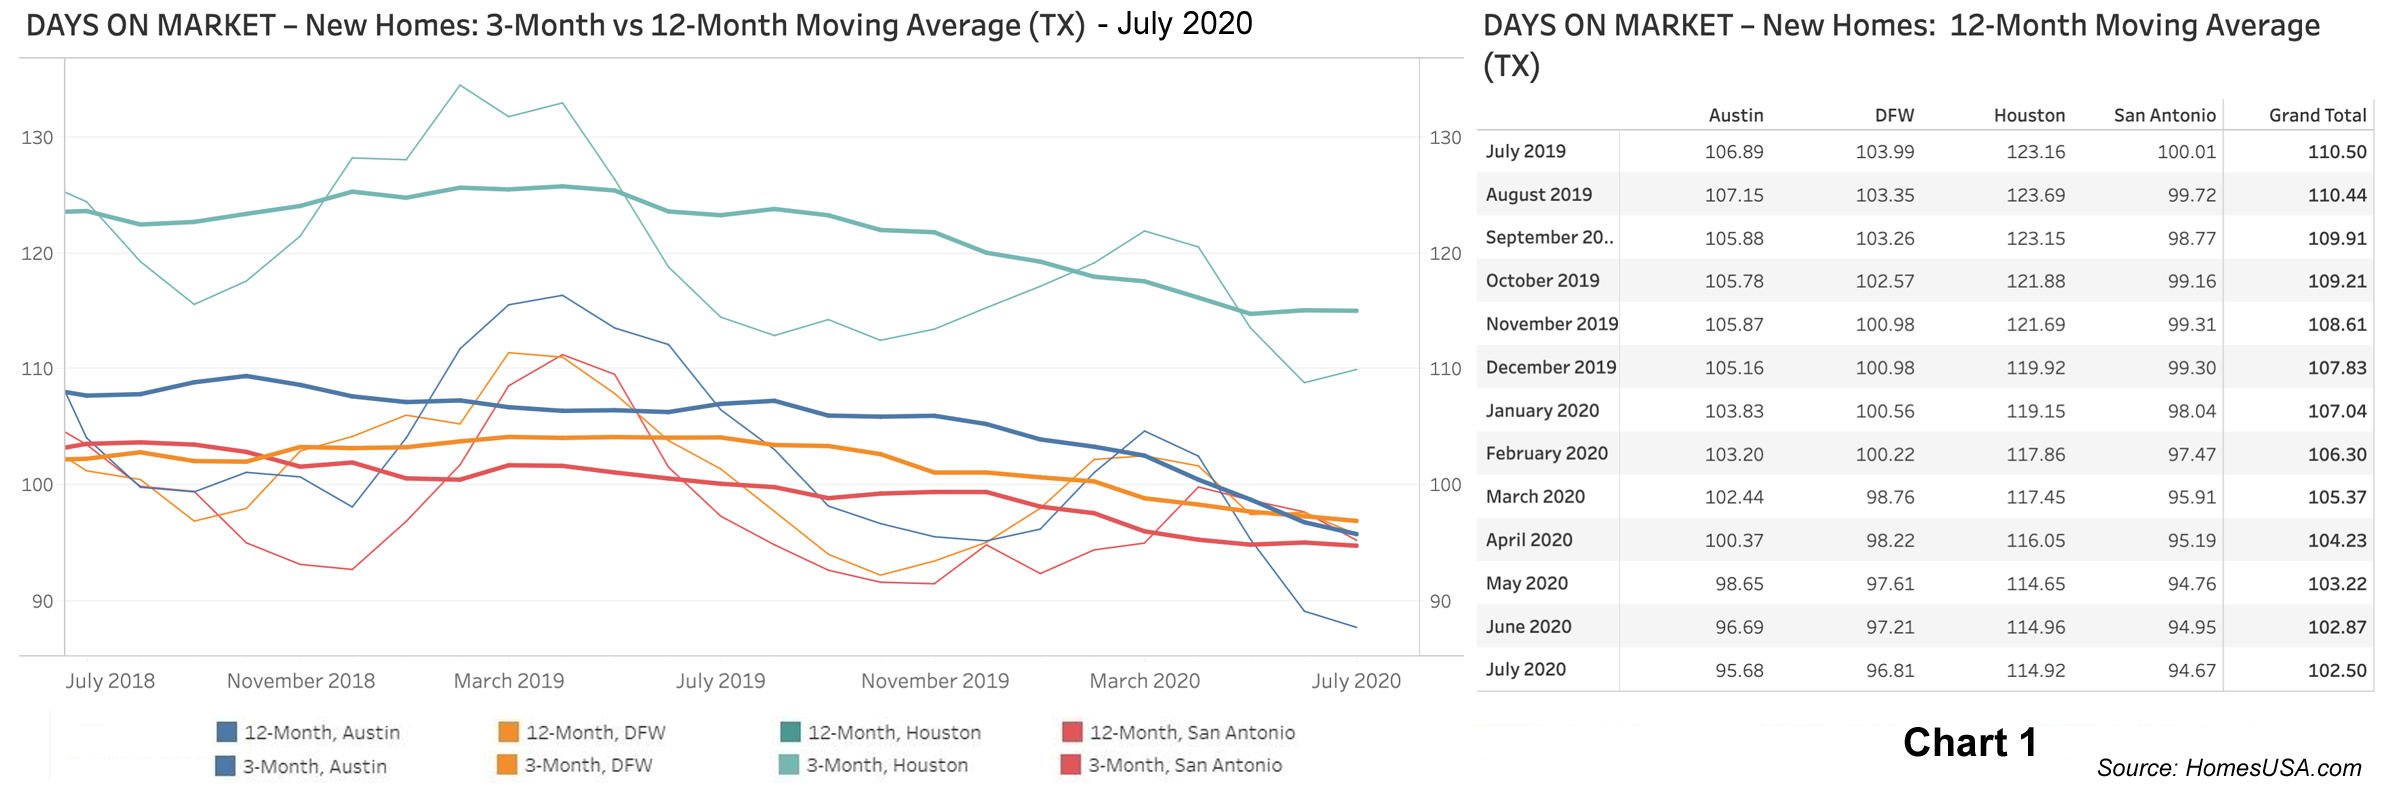 Chart 1: Texas New Homes: Days on Market - July 2020